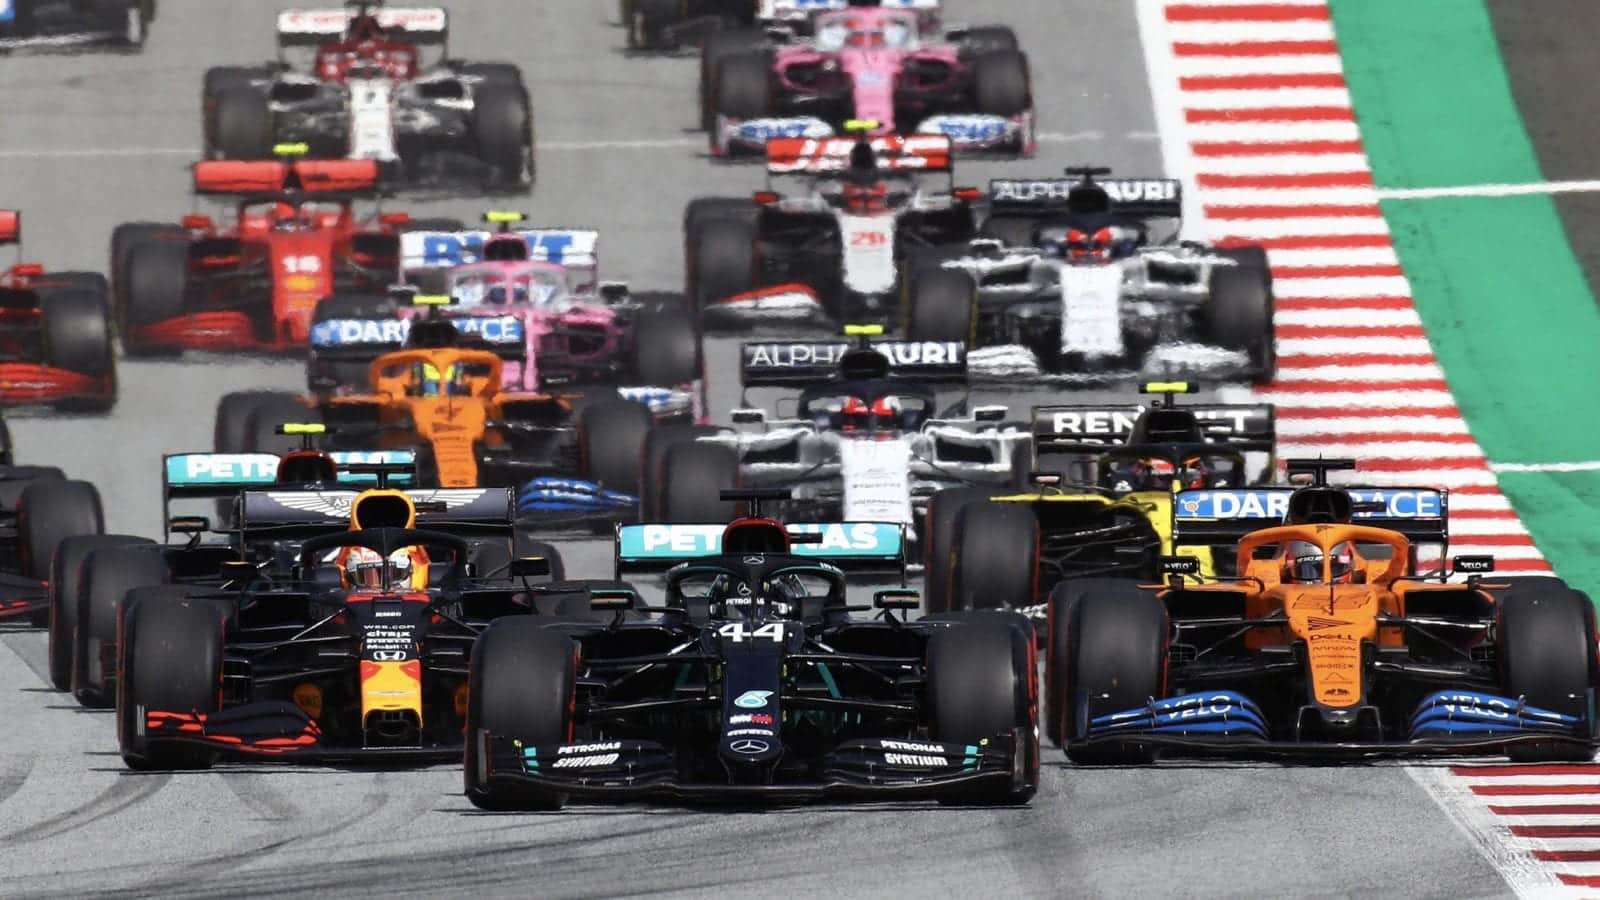 Lewis Hamilton leads from the start of the 2020 F1 Styrian Grand Prix